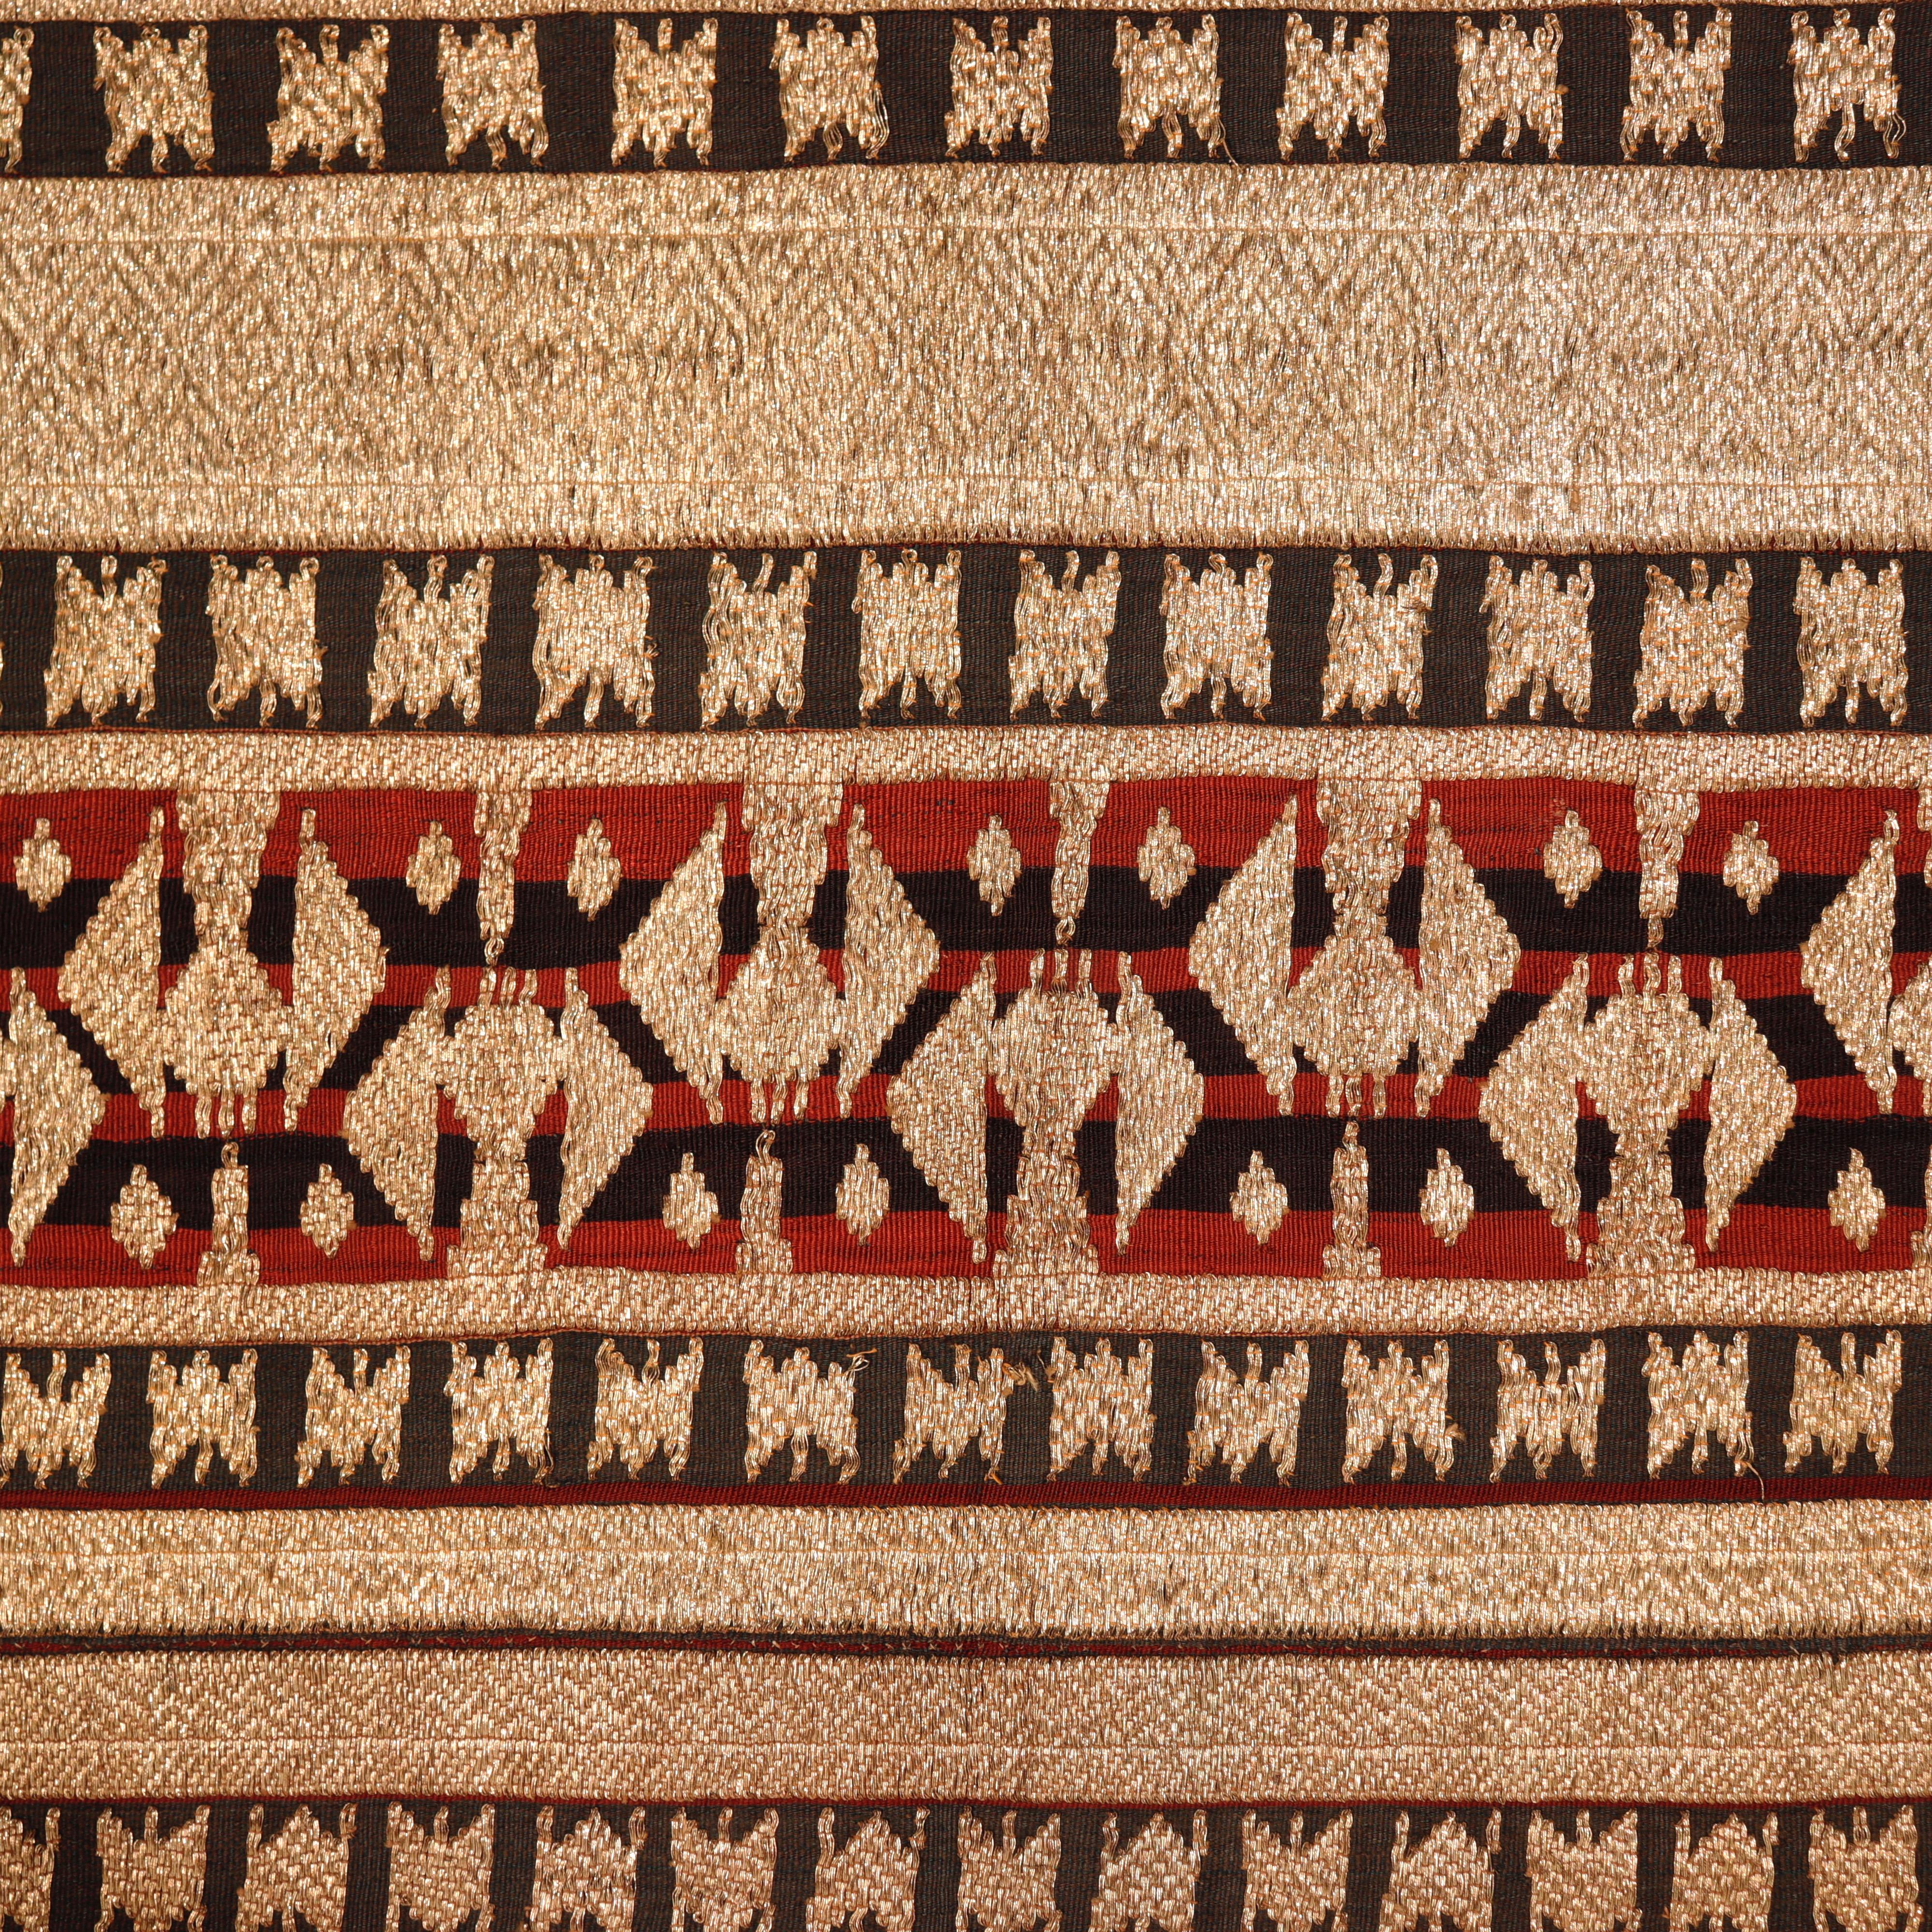 Tribal Antique Indonesian ceremonial skirt from the Abung people of Lampung, Sumatra